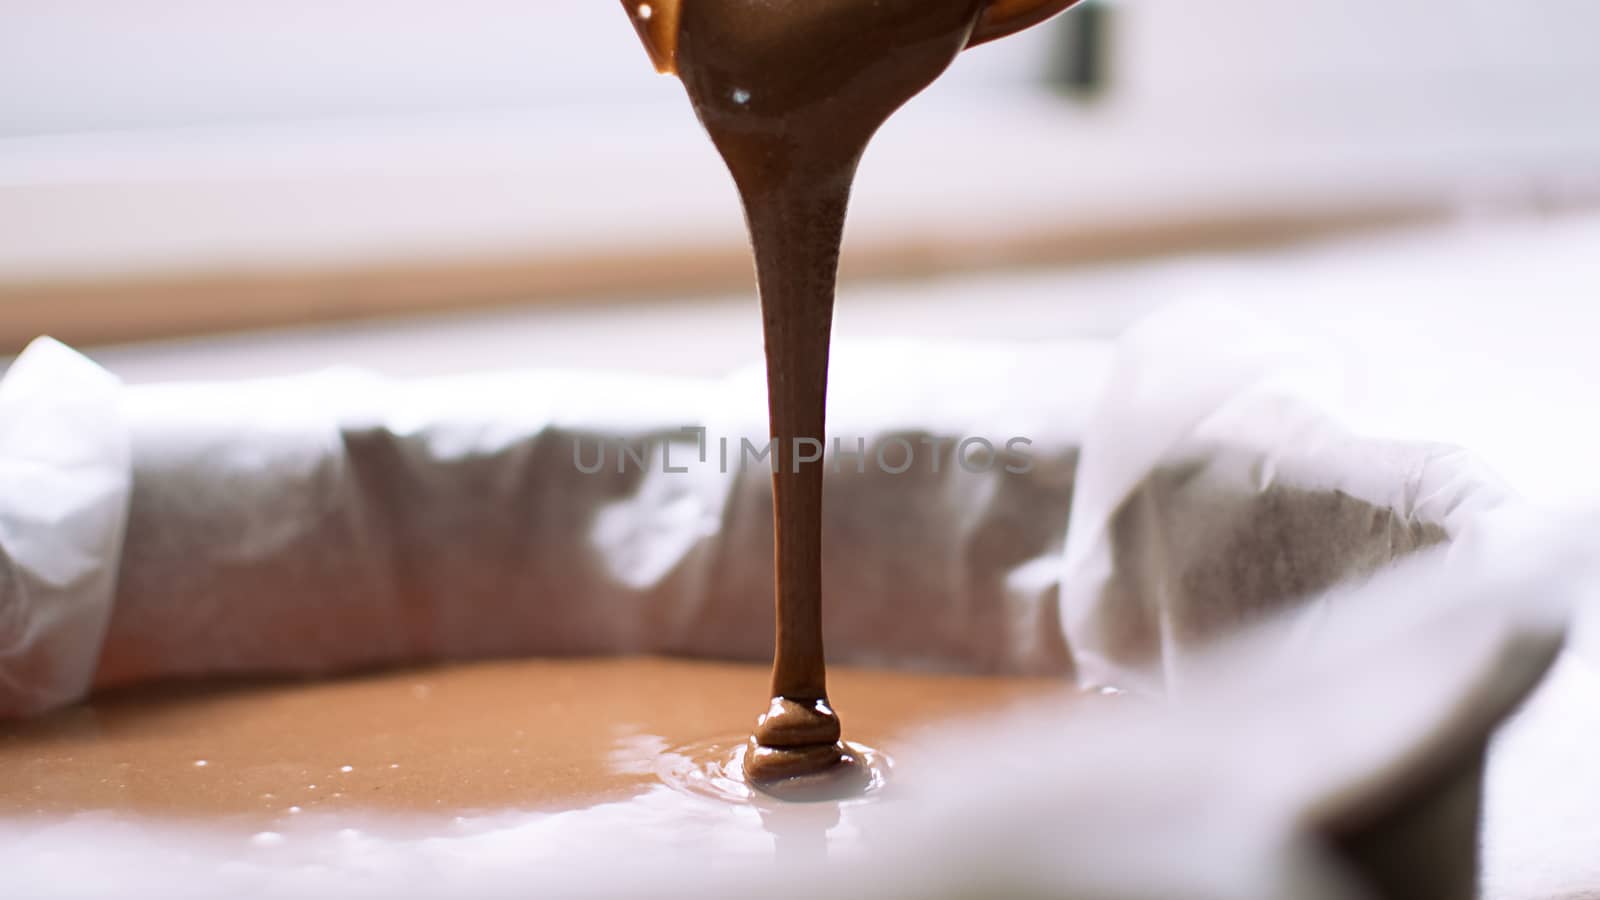 A close-up of chocolate milk liquid being poured into the form of a confectionery syringe in the form mold or mould. Preparation of chocolate sweets, biscuits, cooking process